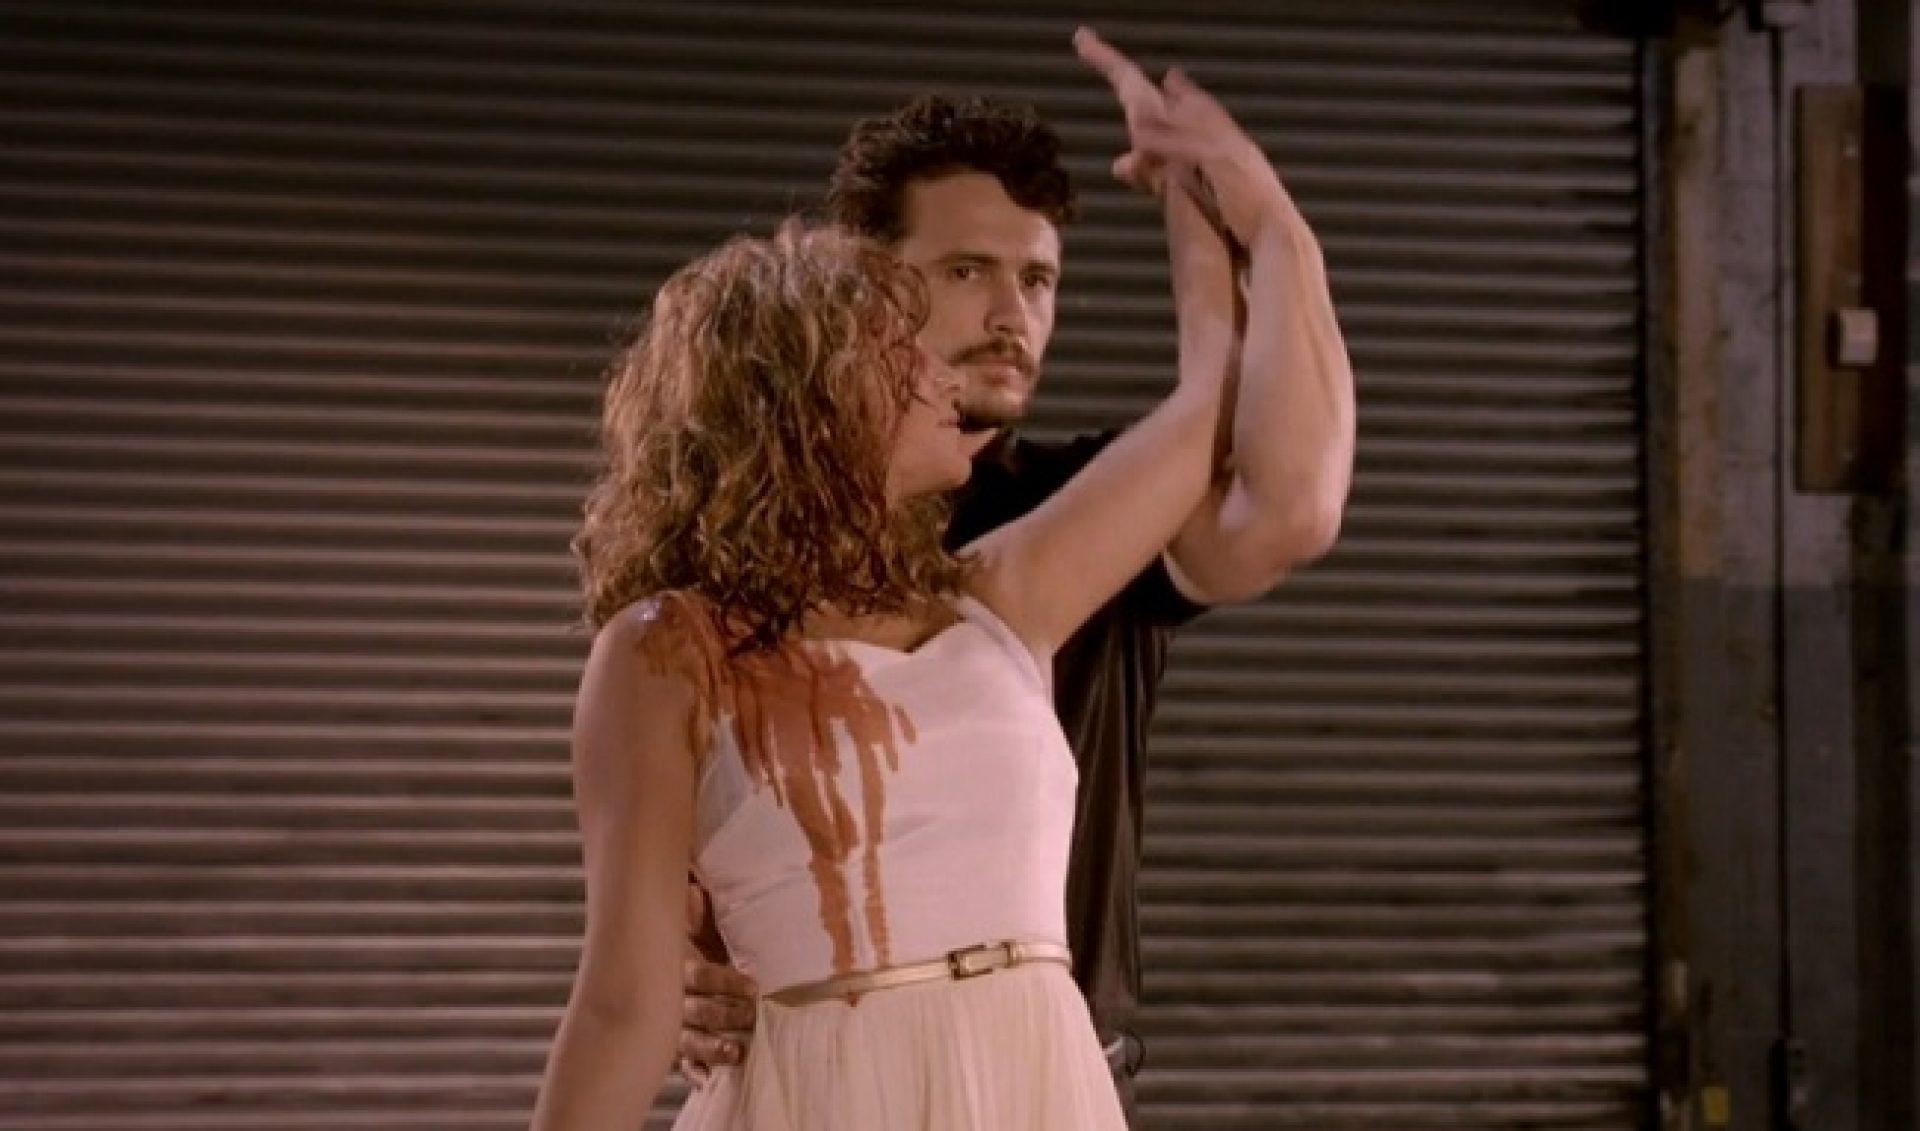 James Franco Is ‘Making a Scene’ With His Series About Film Mashups